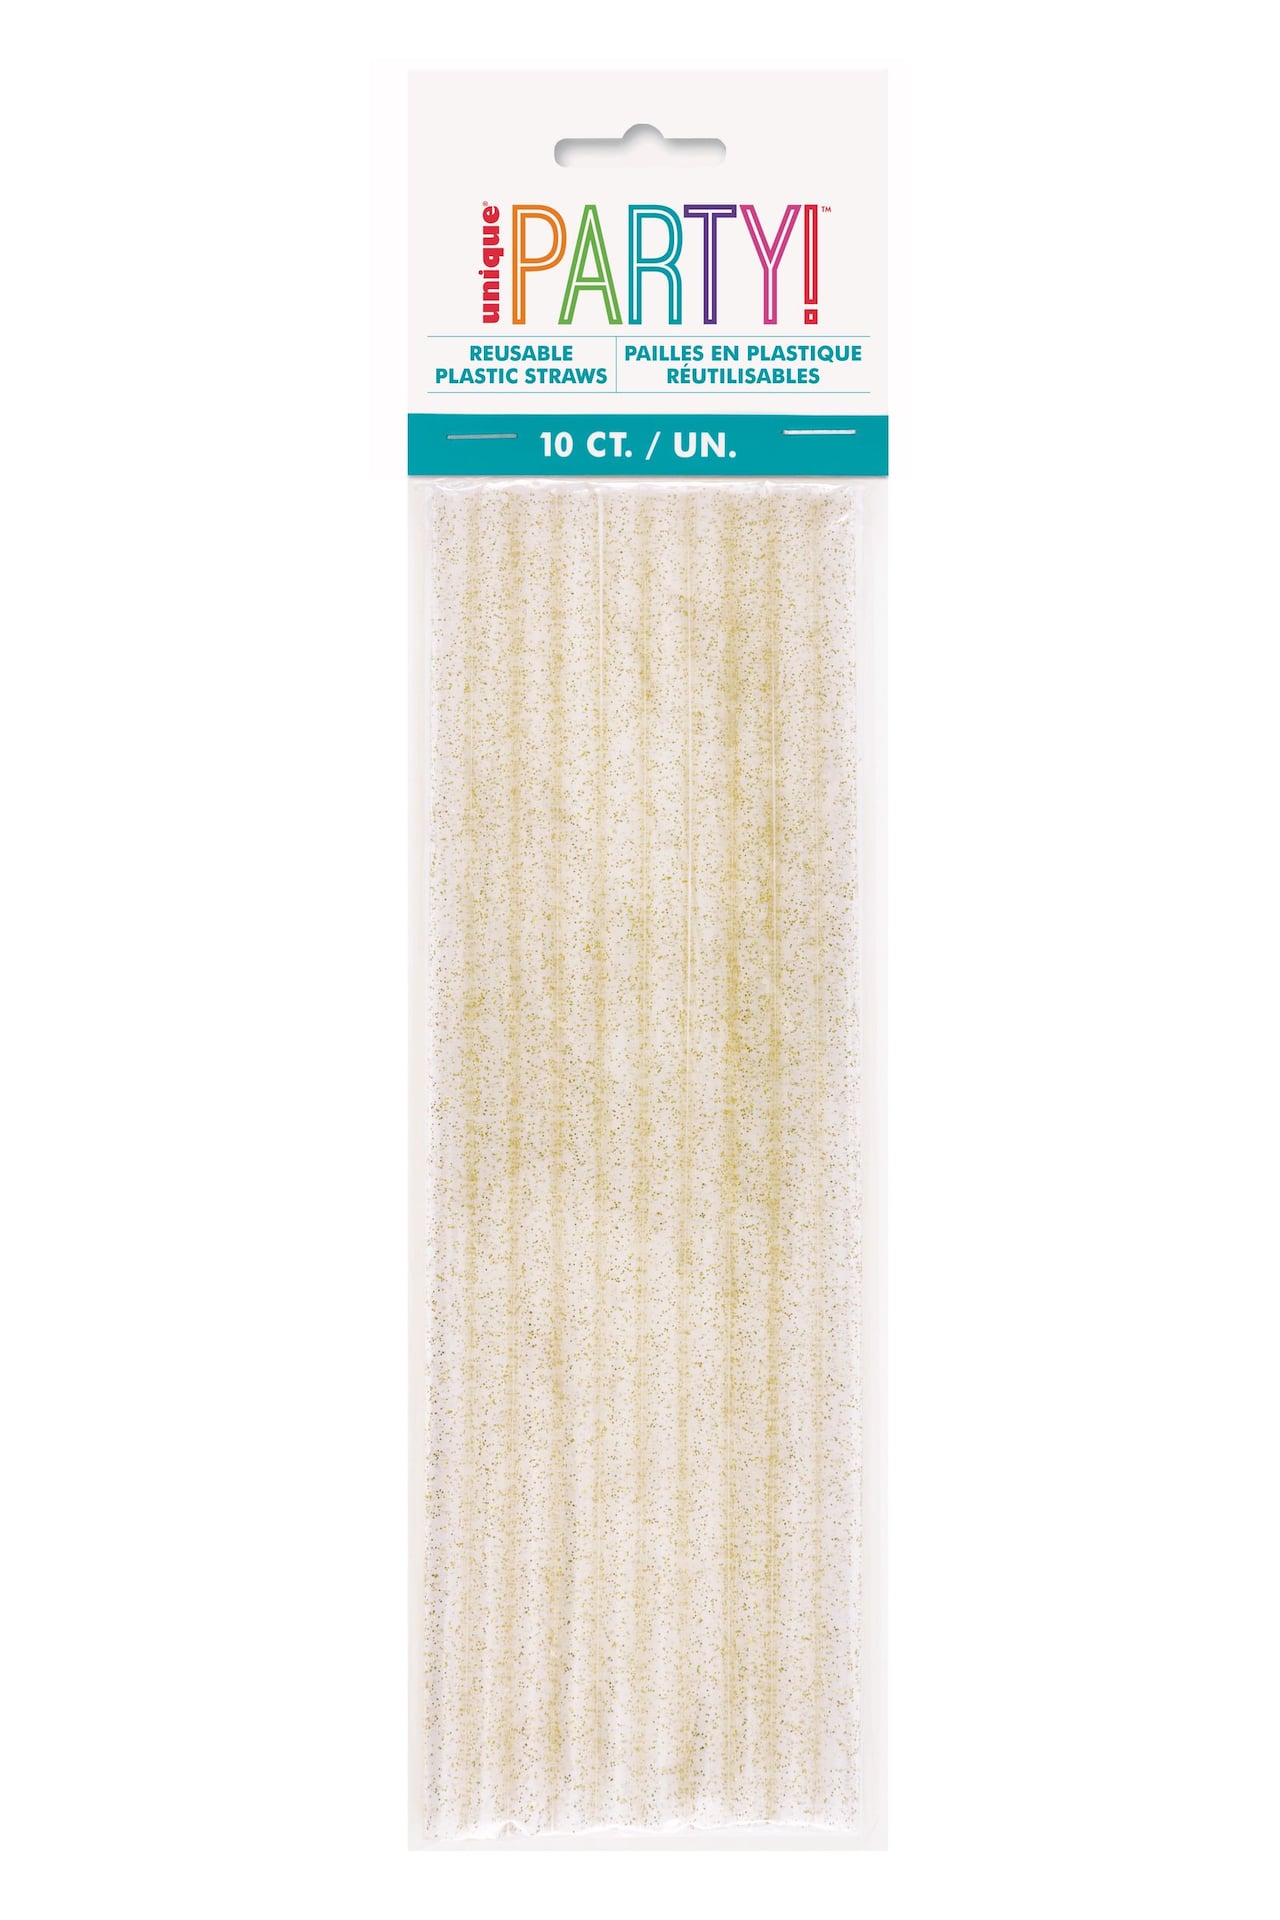 https://media-www.canadiantire.ca/product/seasonal-gardening/party-city-everyday/party-city-party-supplies-decor/8544484/gold-confetti-glitter-straws-0099a298-be98-40bd-bcf4-b065cb87106c-jpgrendition.jpg